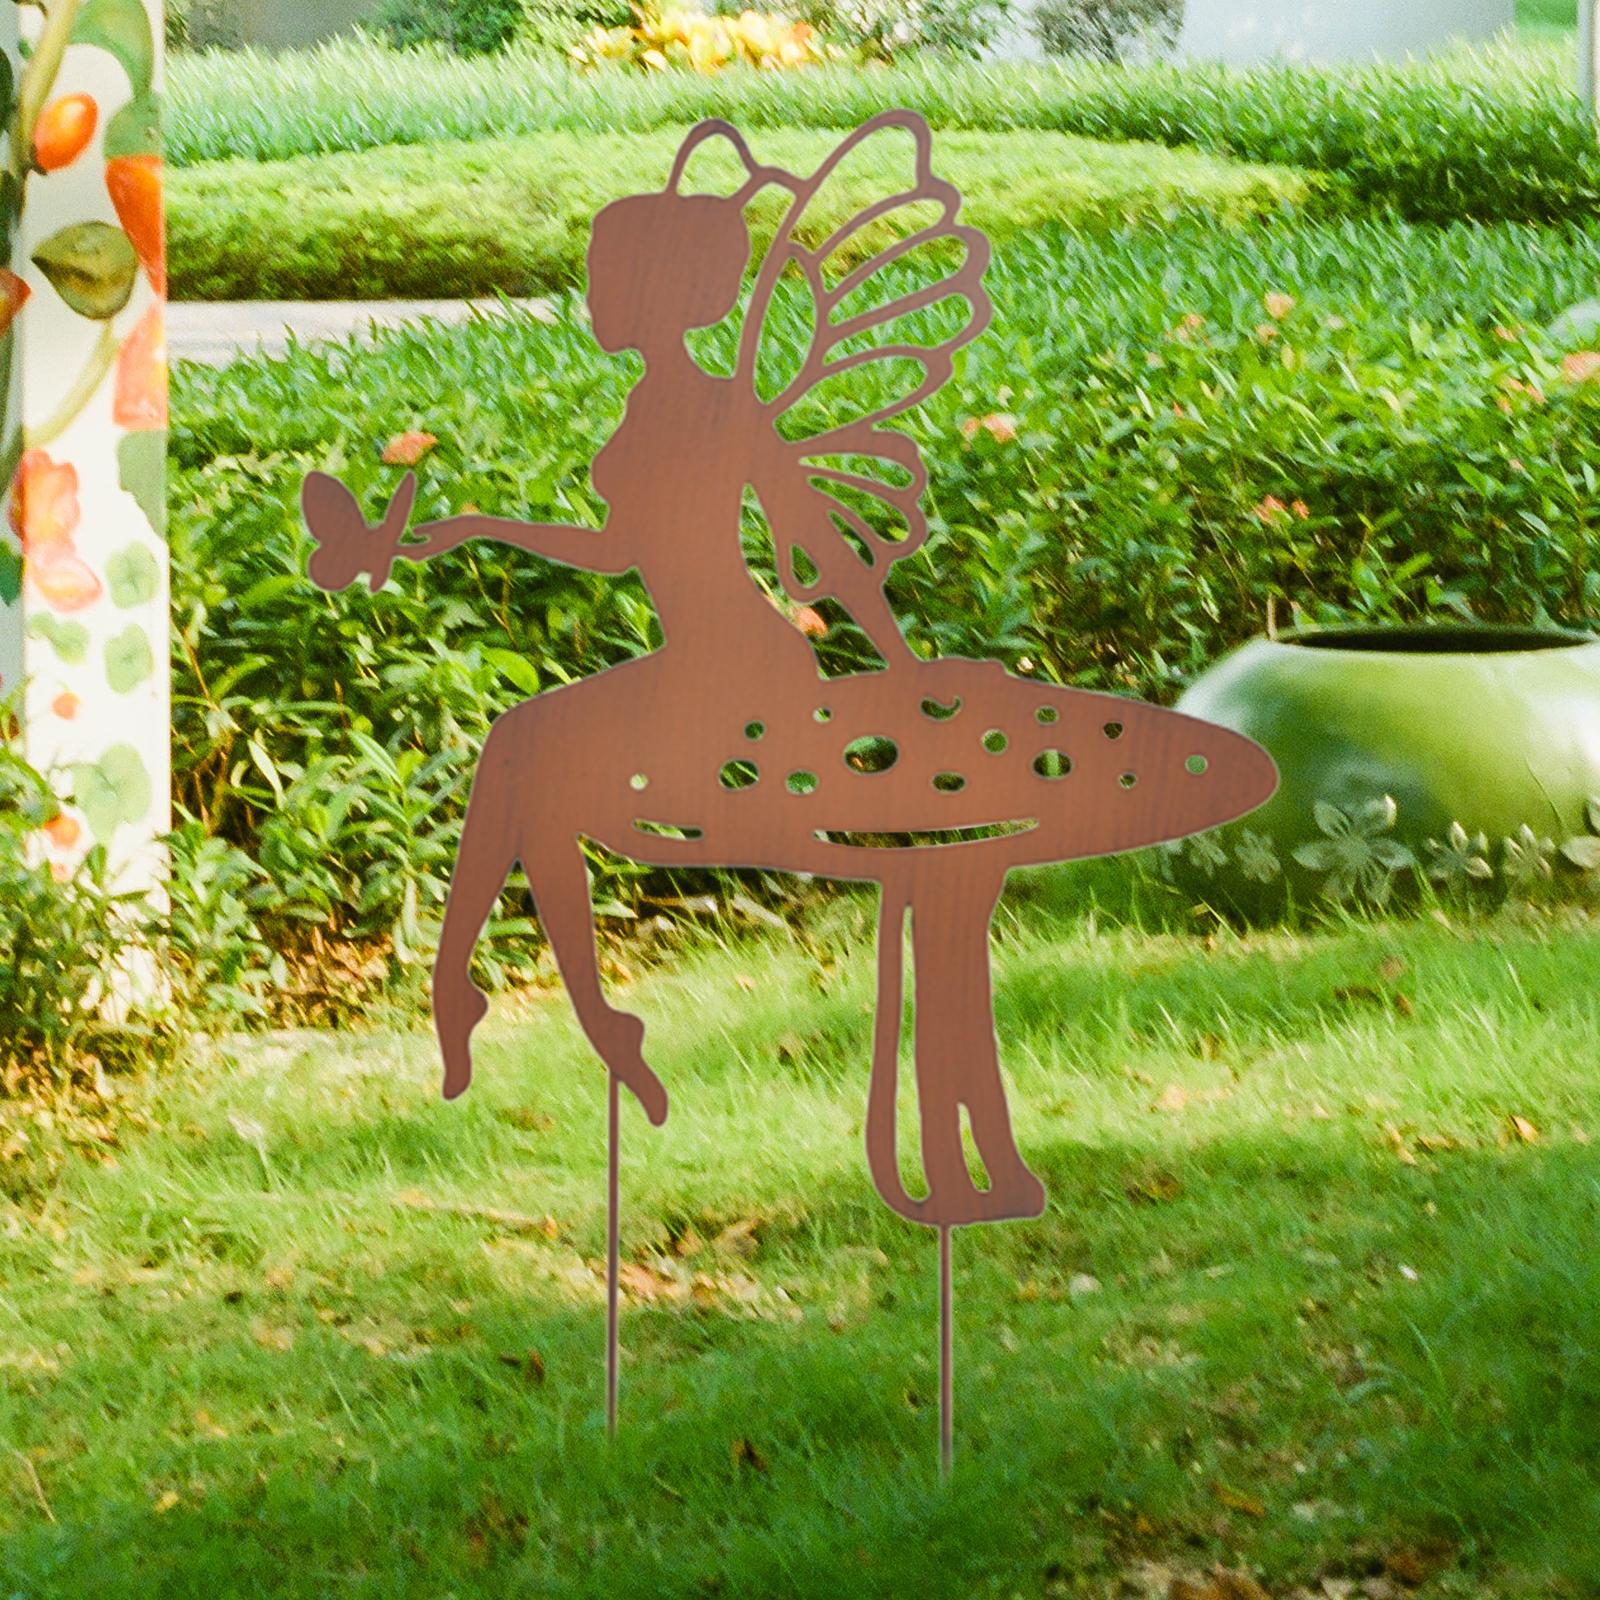 Fairy Silhouette Garden Stakes Arts Ornament for Yard Signs Flower Pot